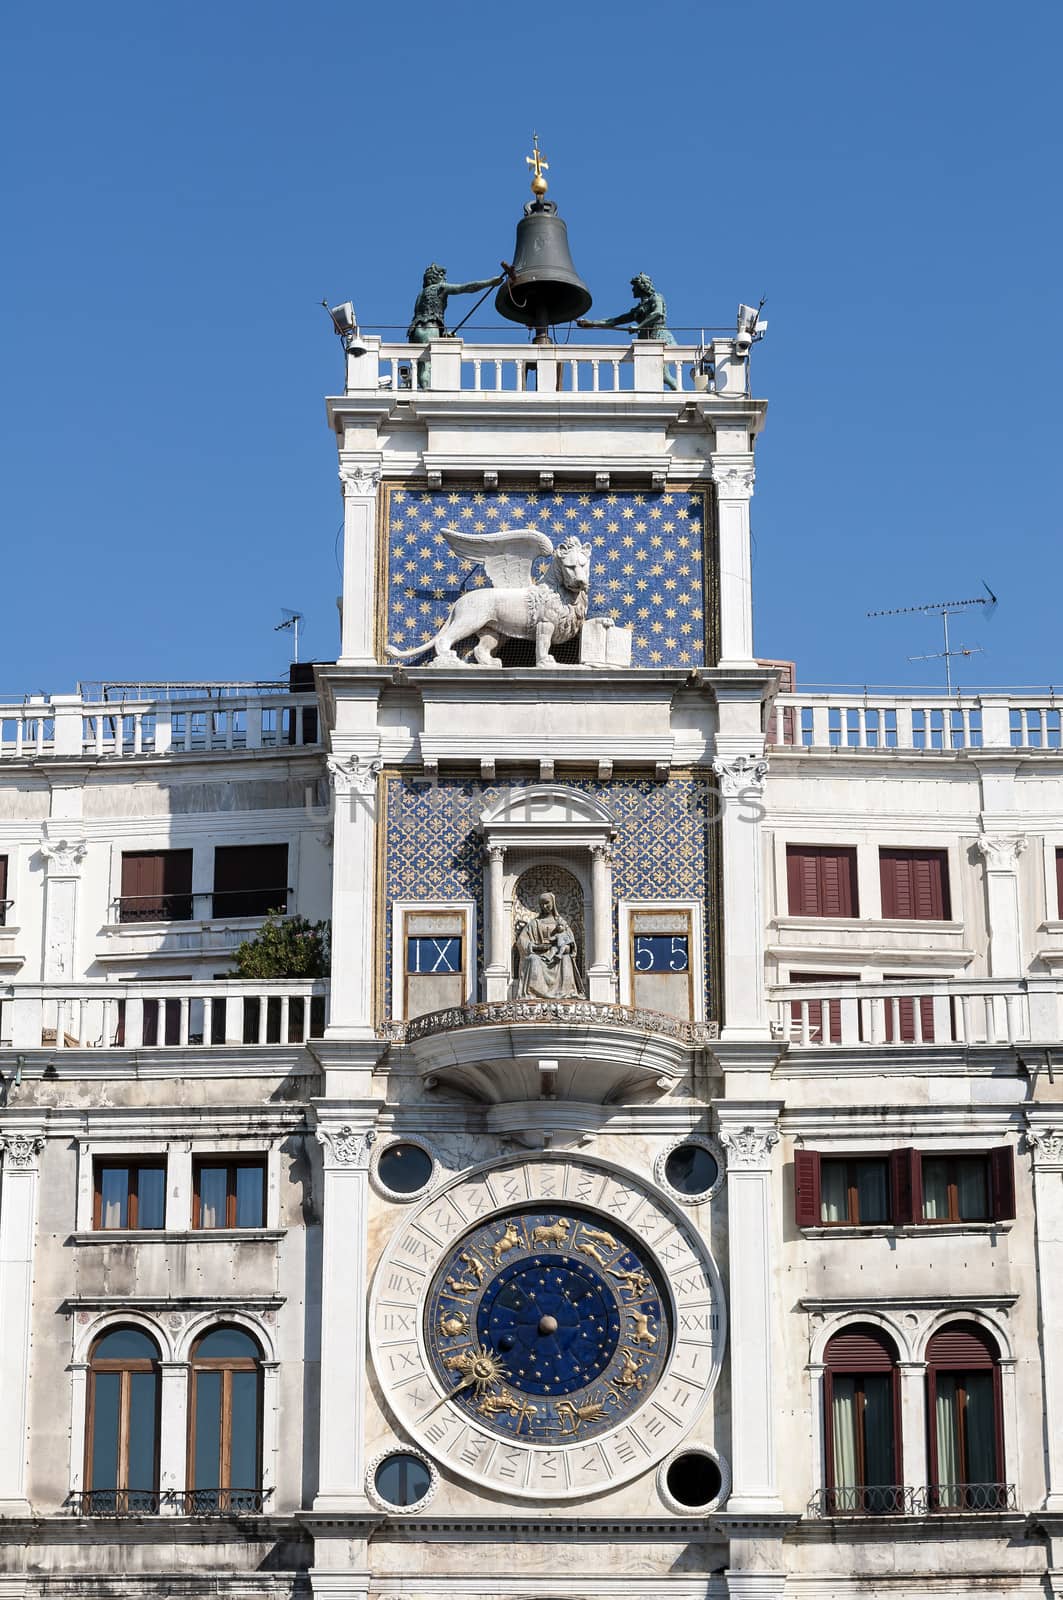 Astronomical clock and Lion of St Mark, Venice, Italy.